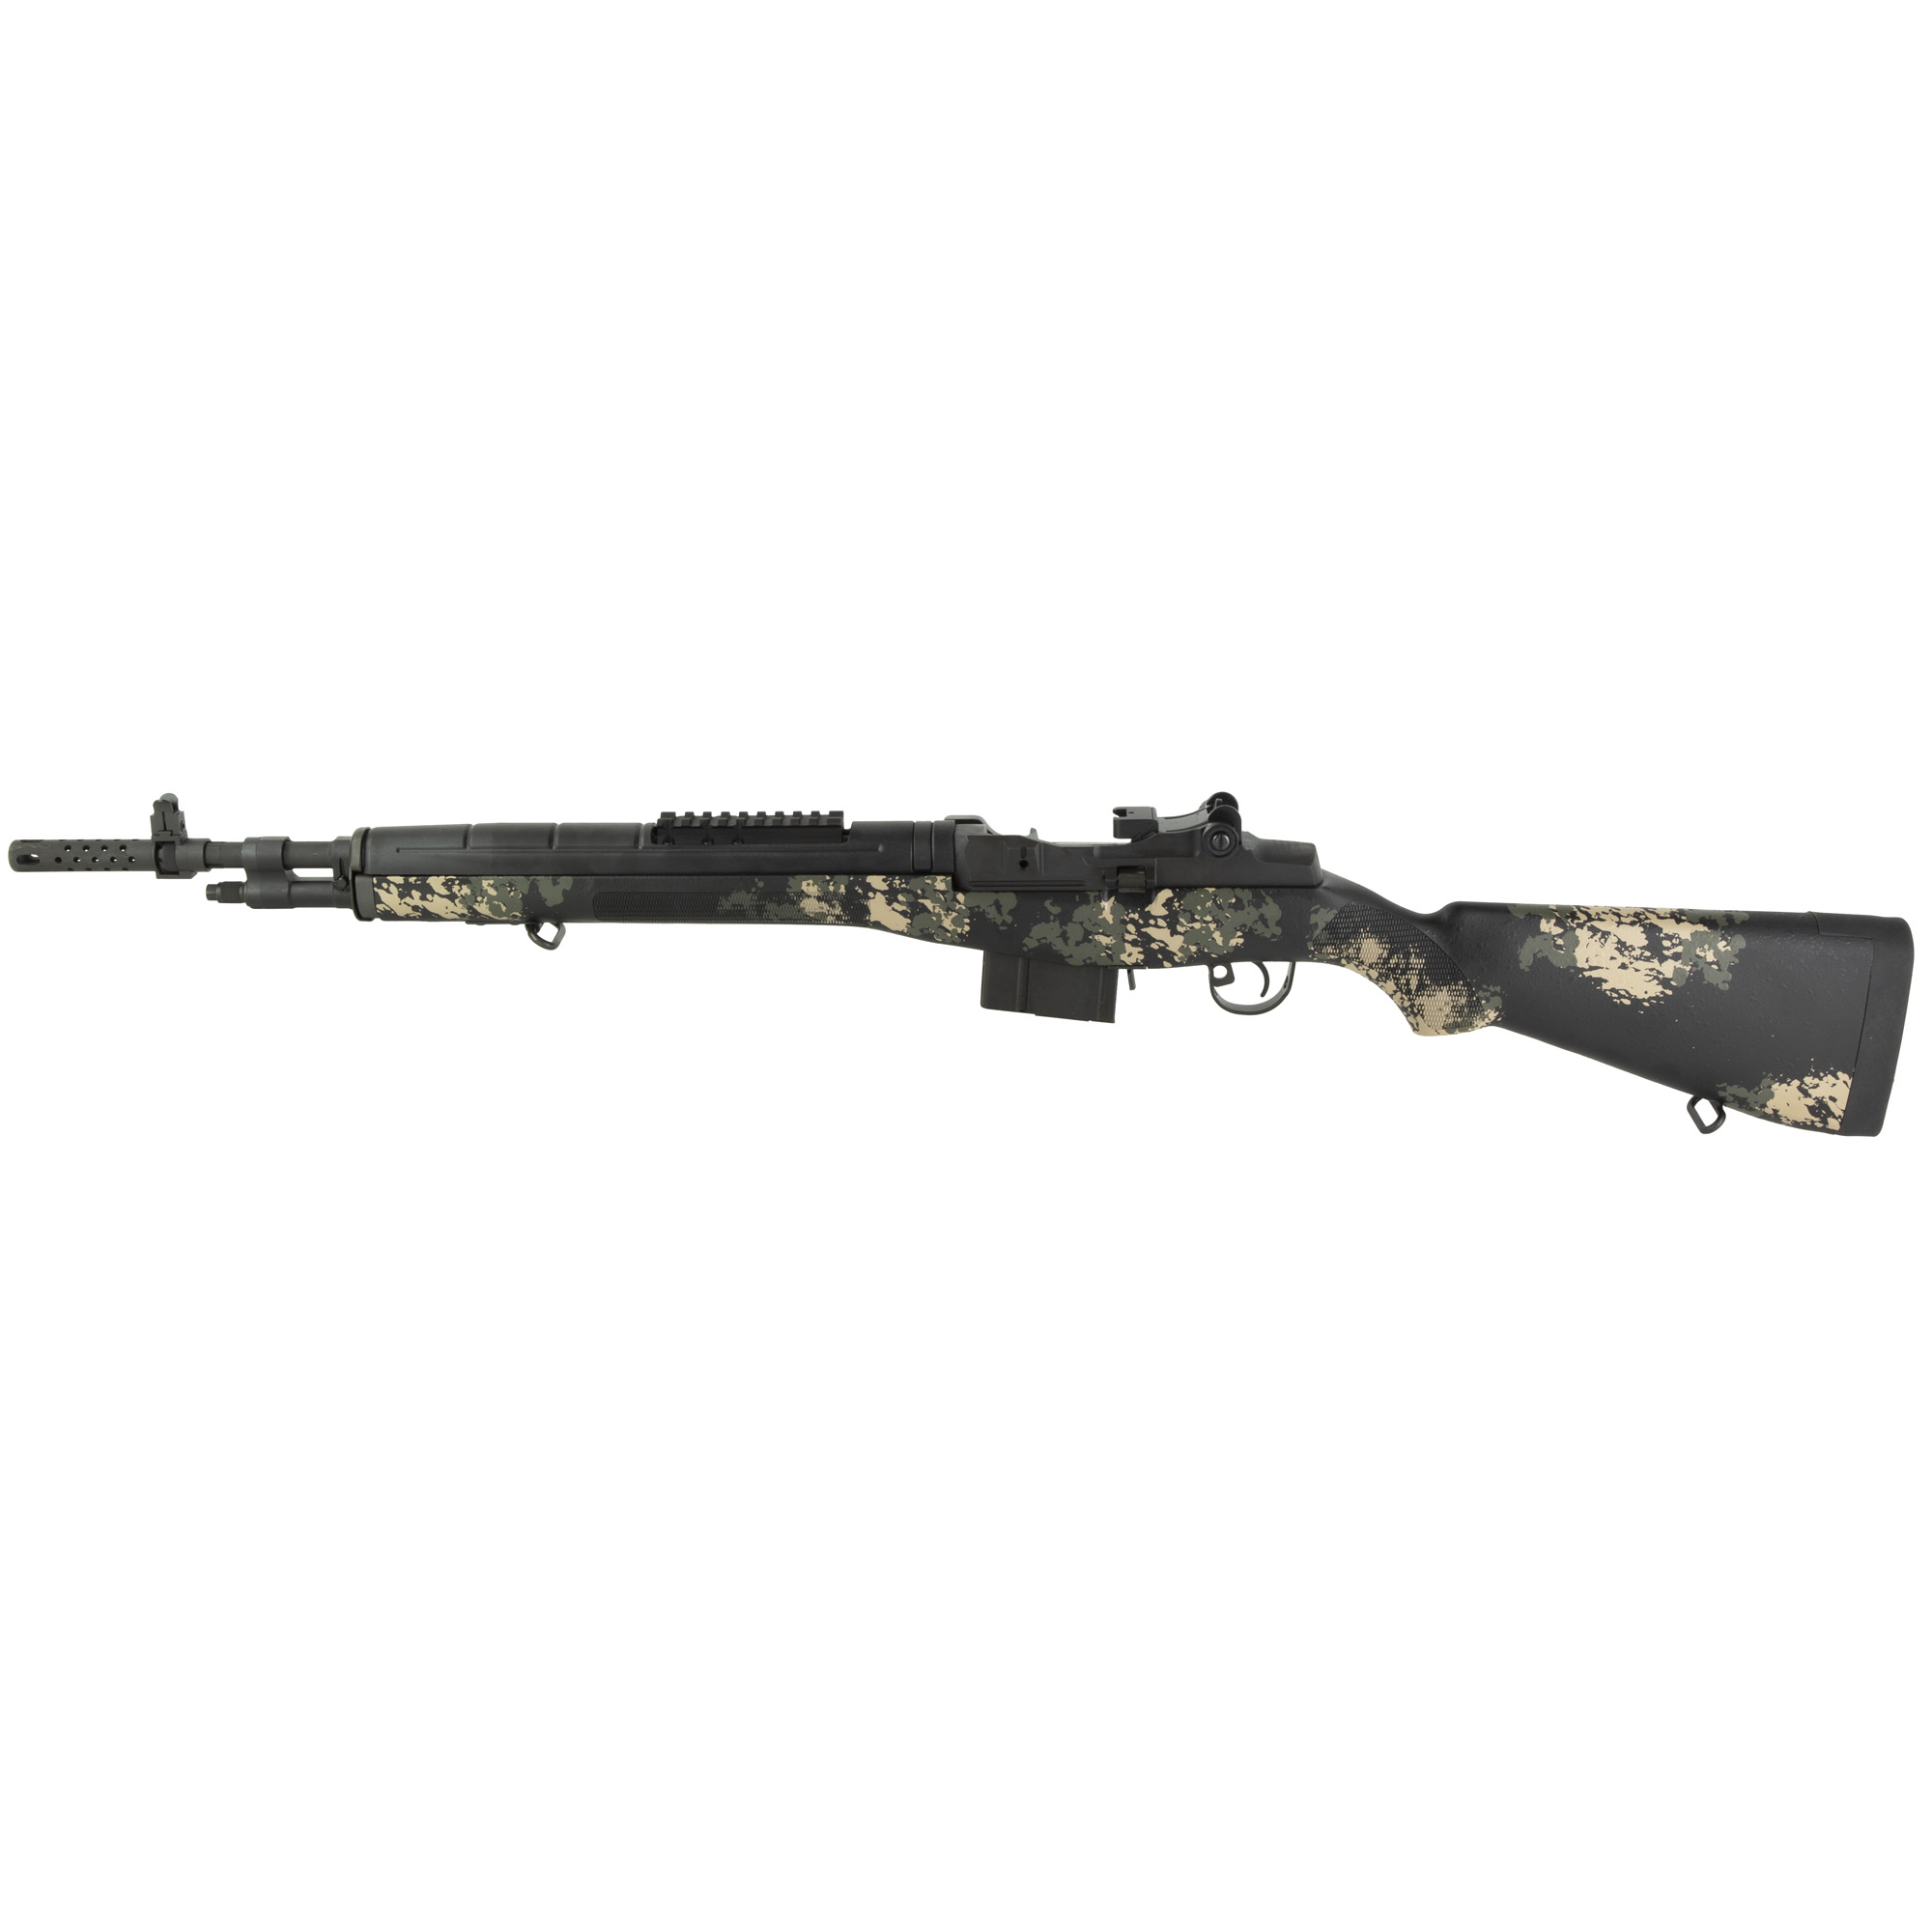 SPRINGFIELD M1A SCT GRN SPNG 308 10RD